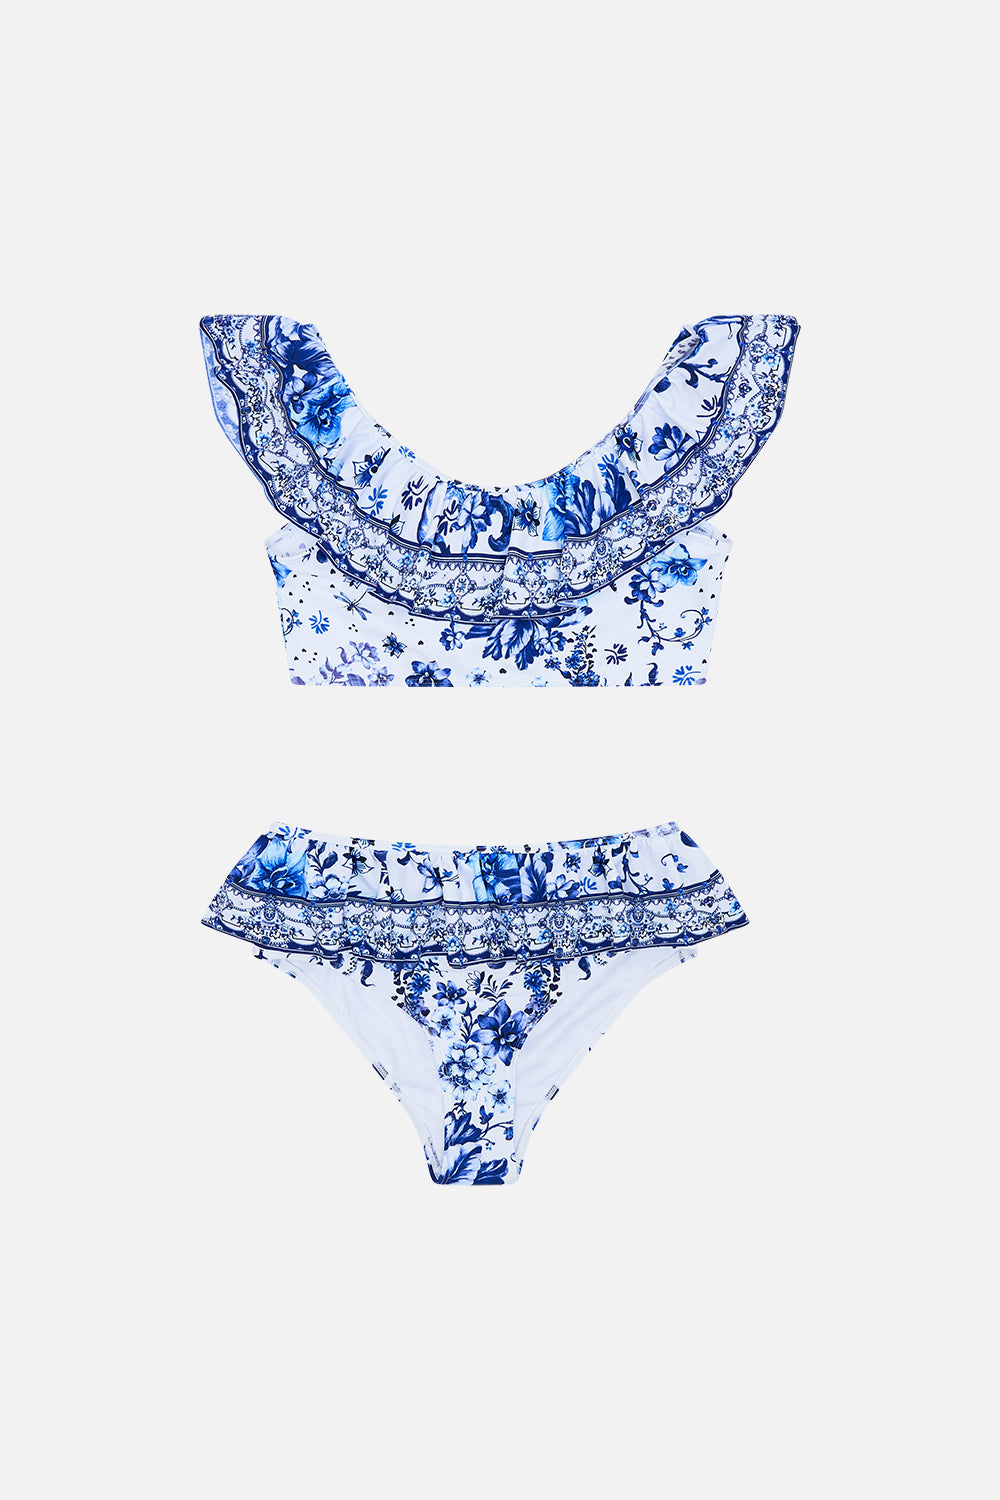 Front product view of Milla by CAMILLA kids frill bikini in Glaze and Graze print